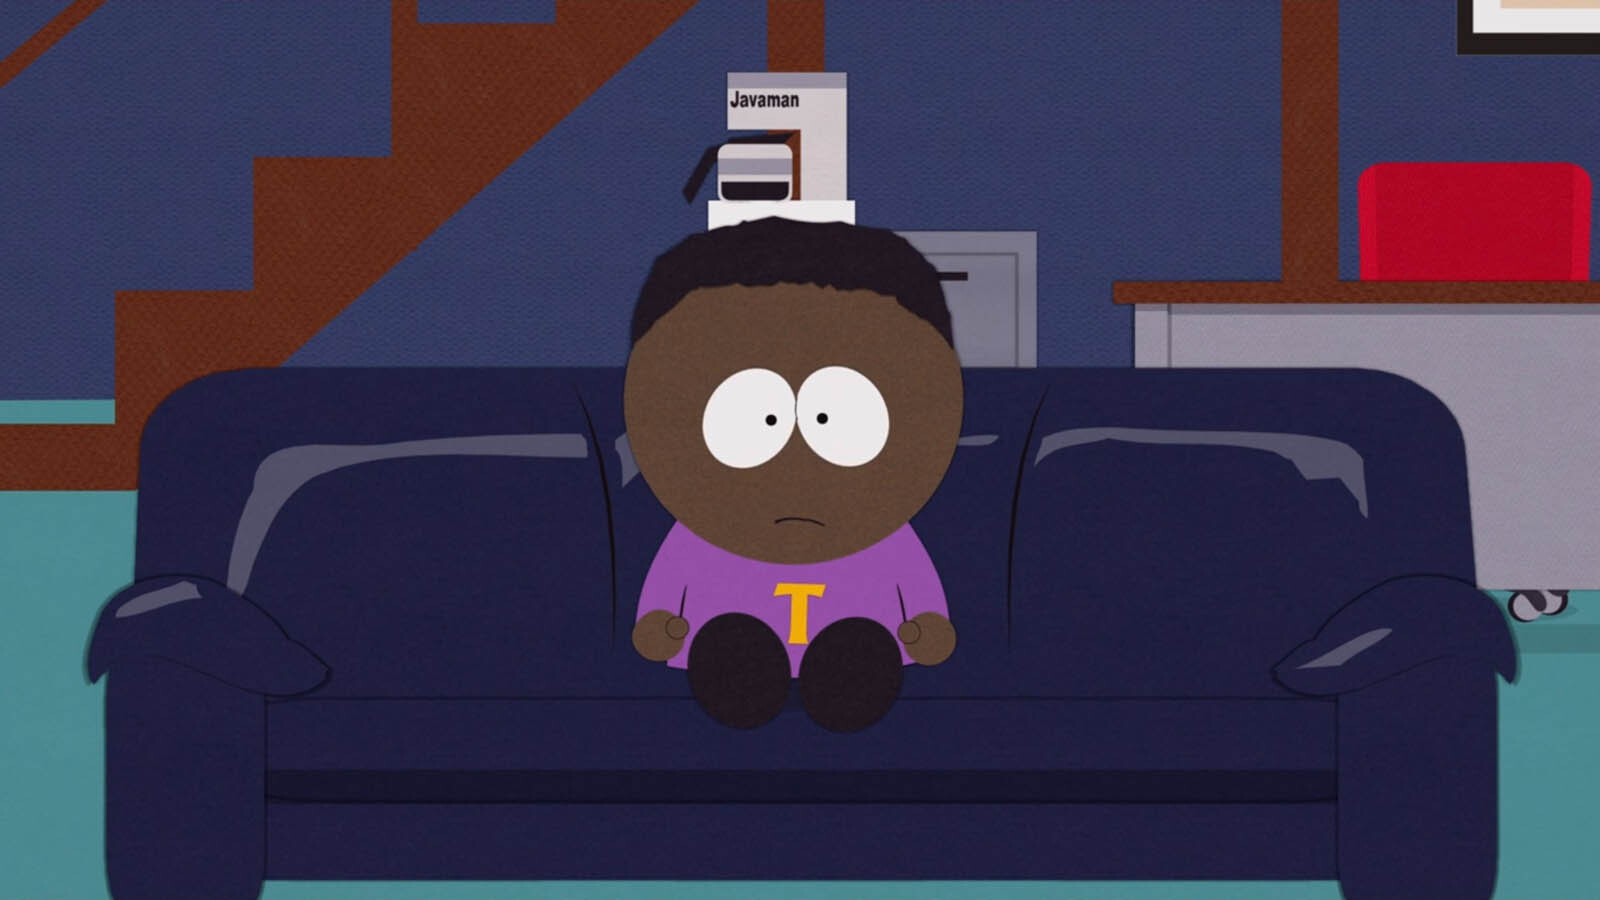 25 Best South Park Characters: Icons from the Legendary Show